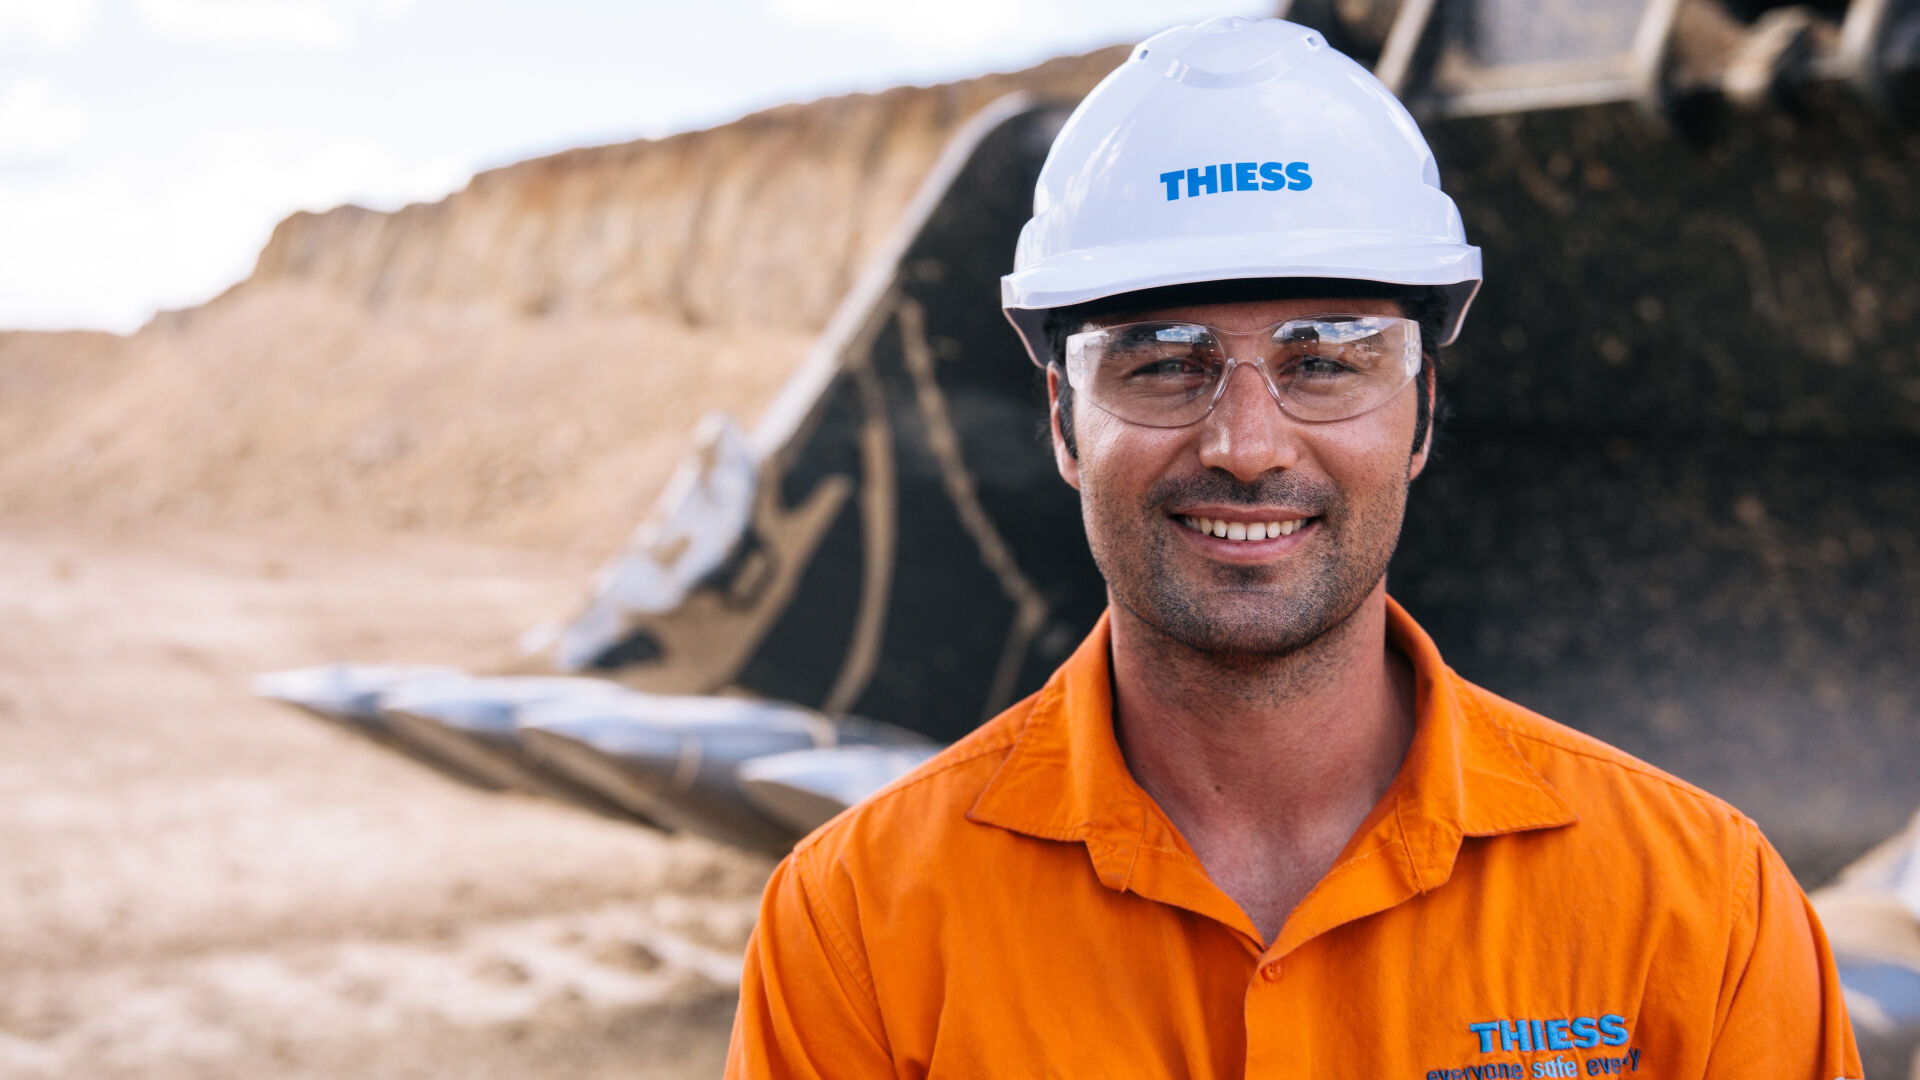 Thiess careers - hiring now